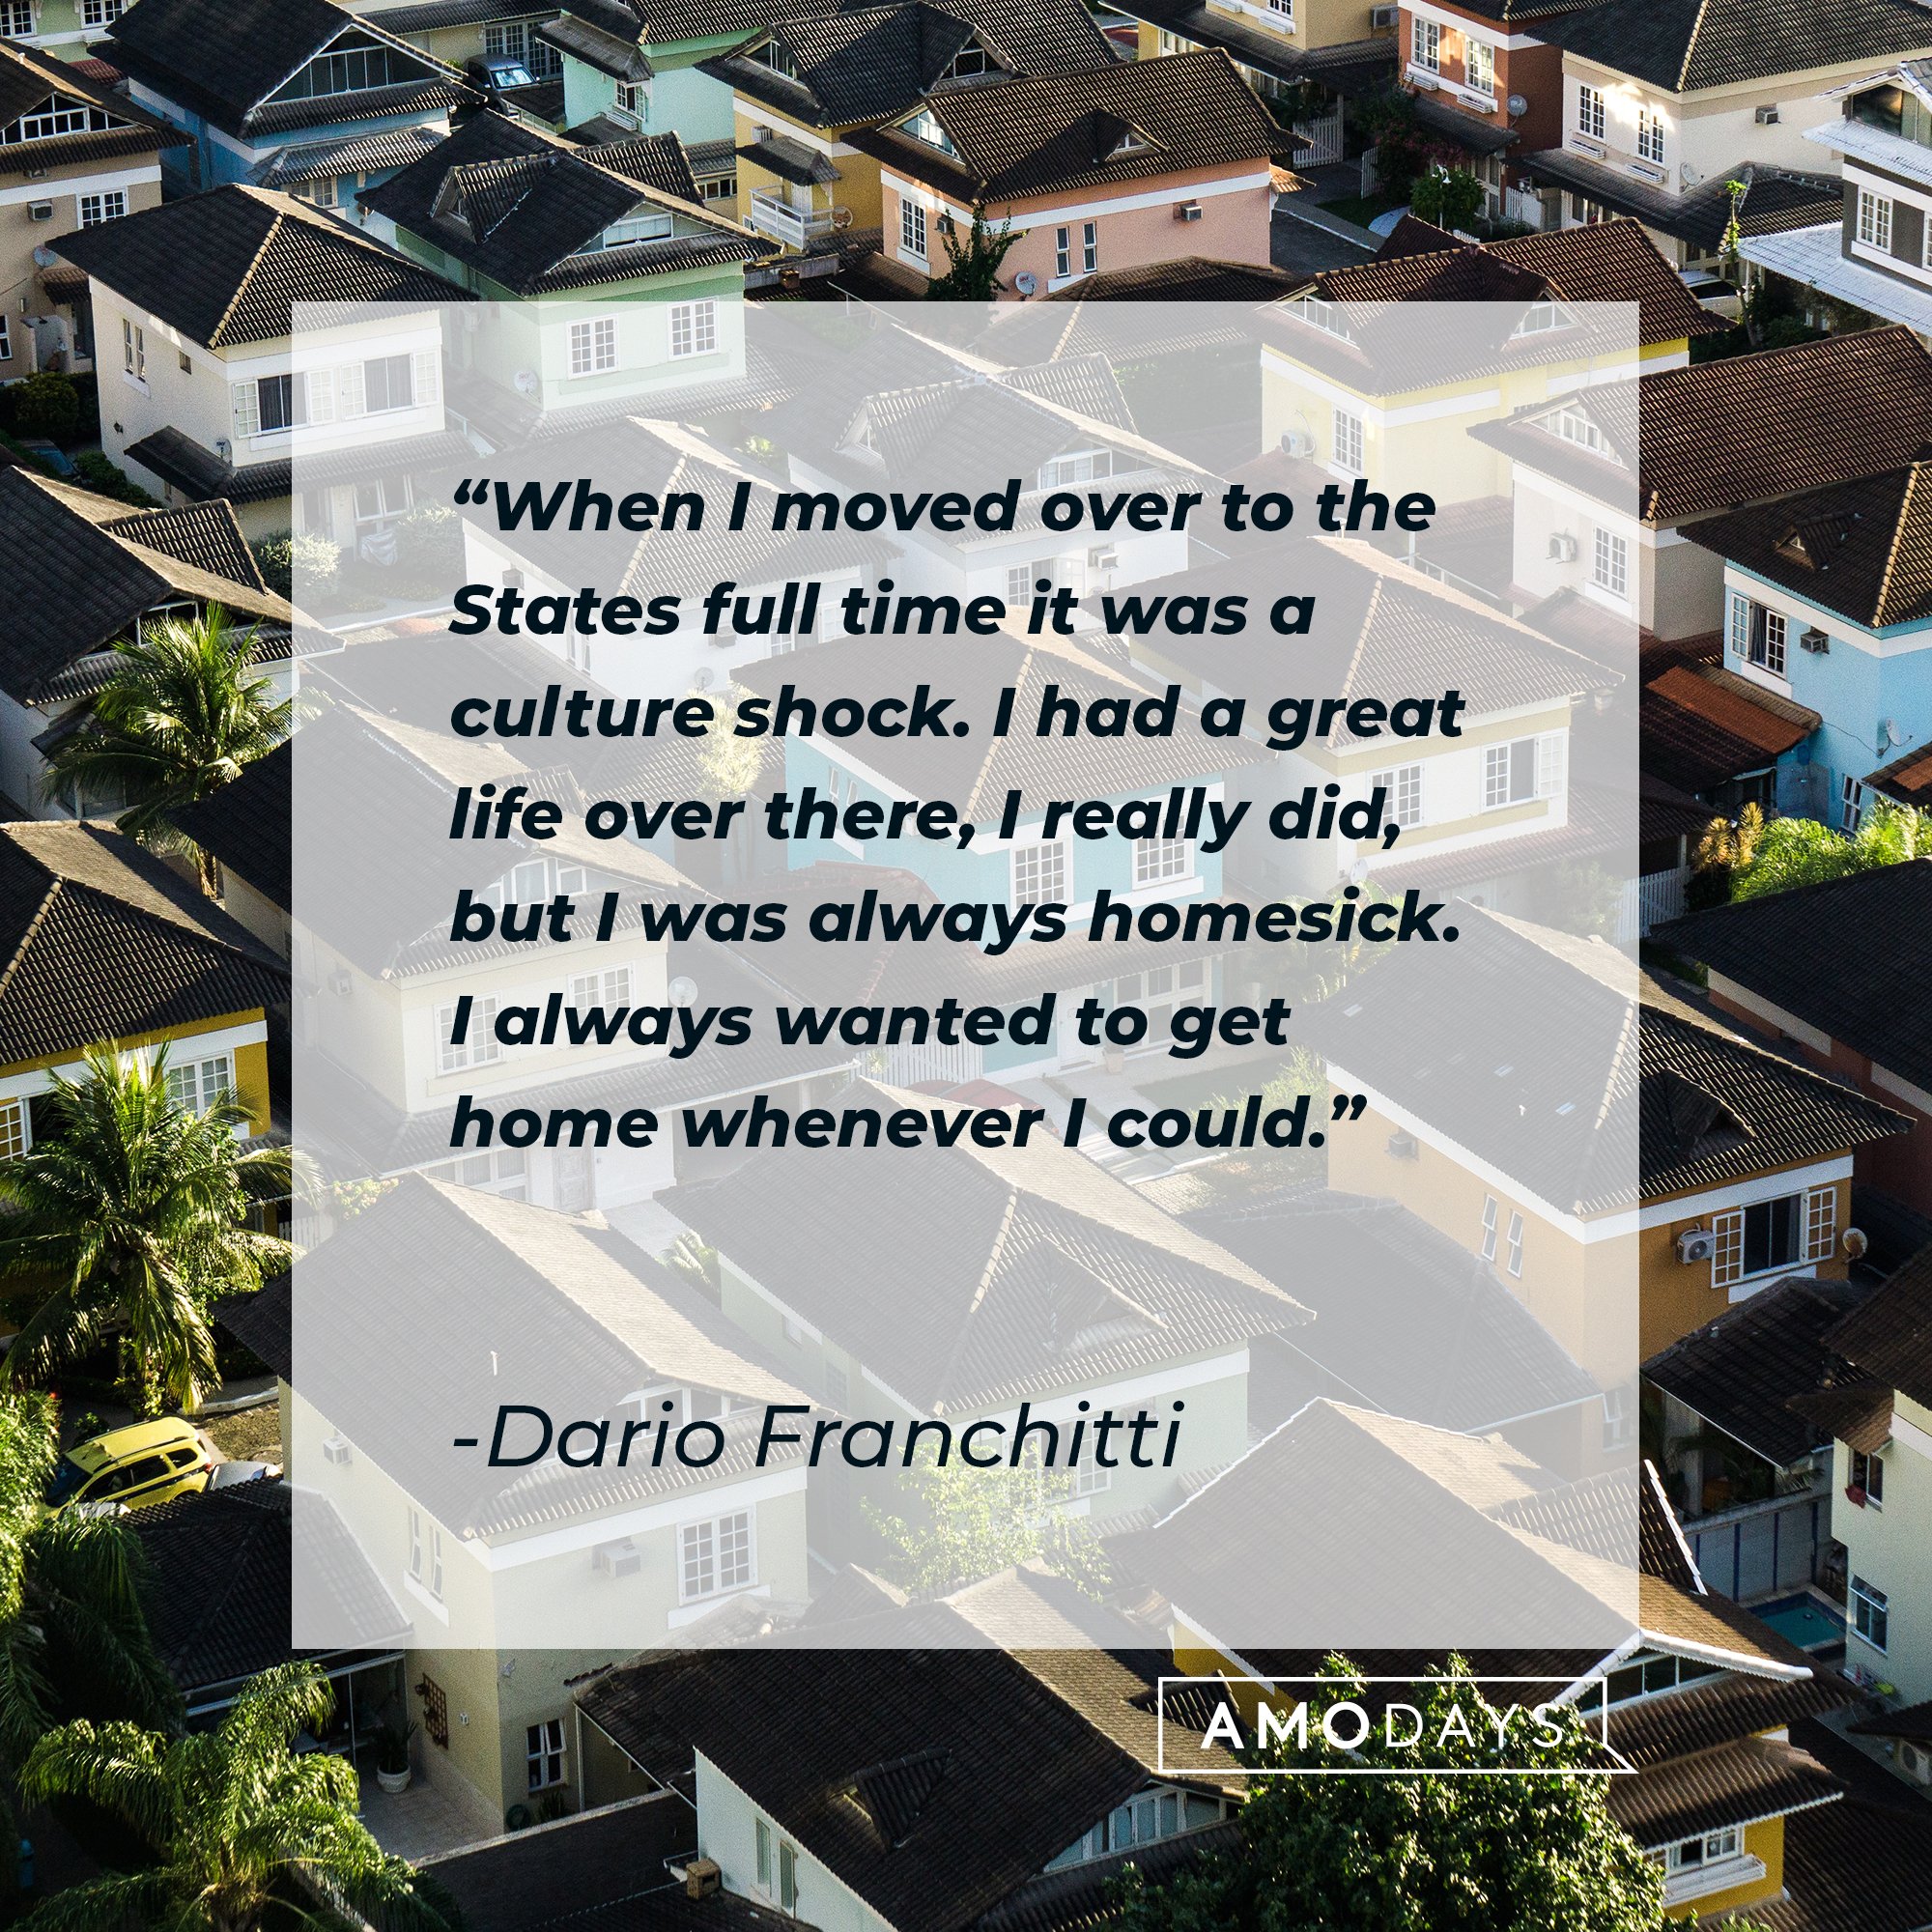 Dario Franchitti's quote: "When I moved over to the States full time it was a culture shock. I had a great life over there, I really did, but I was always homesick. I always wanted to get home whenever I could." | Image: AmoDays